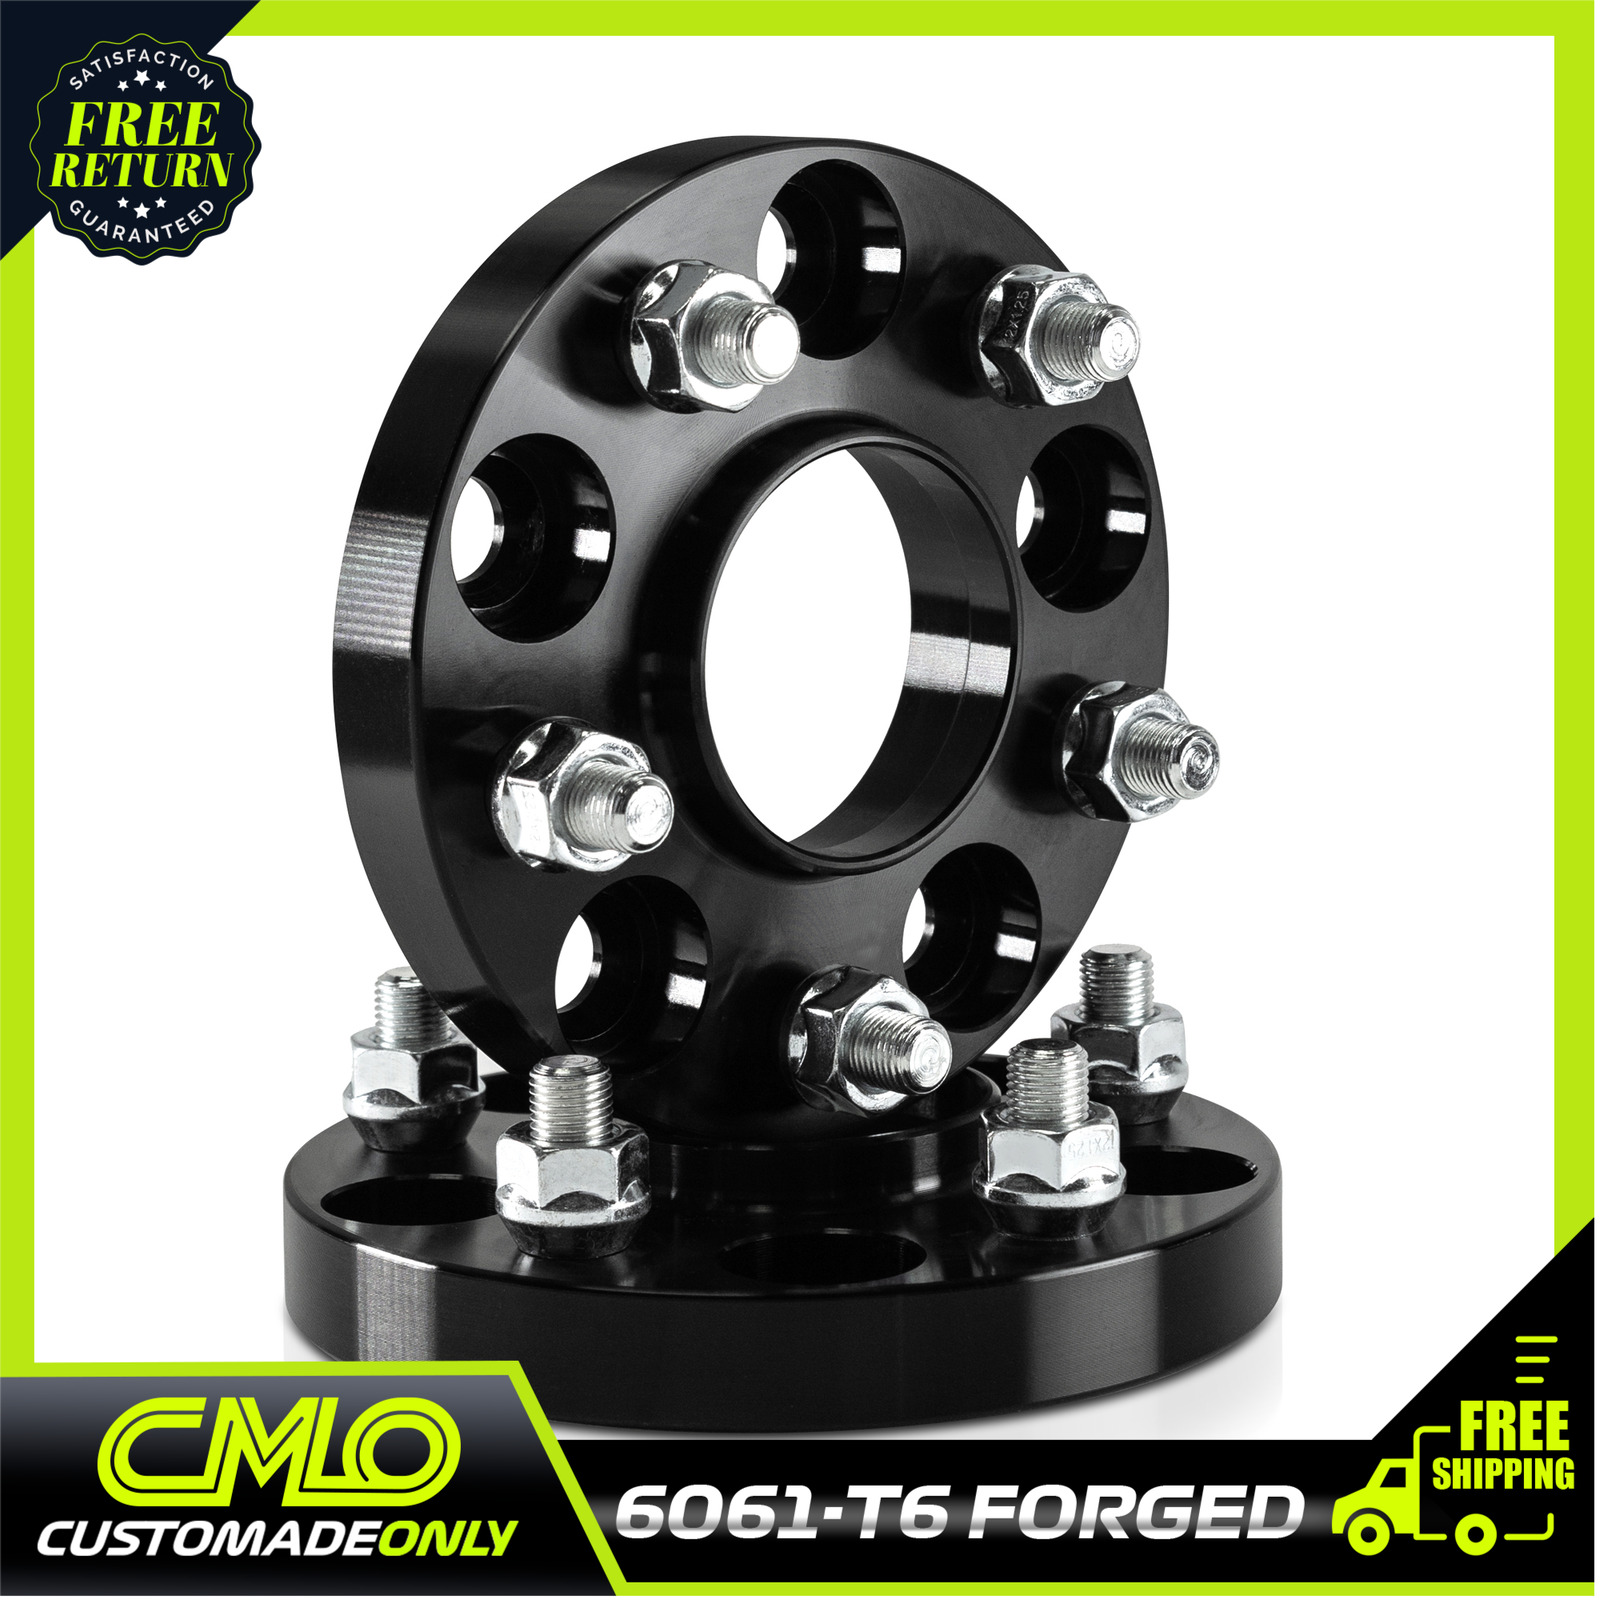 2pc 20mm Black Hubcentric Wheel Spacers 5x100 Fits tC Celica Camry Corolla Prius